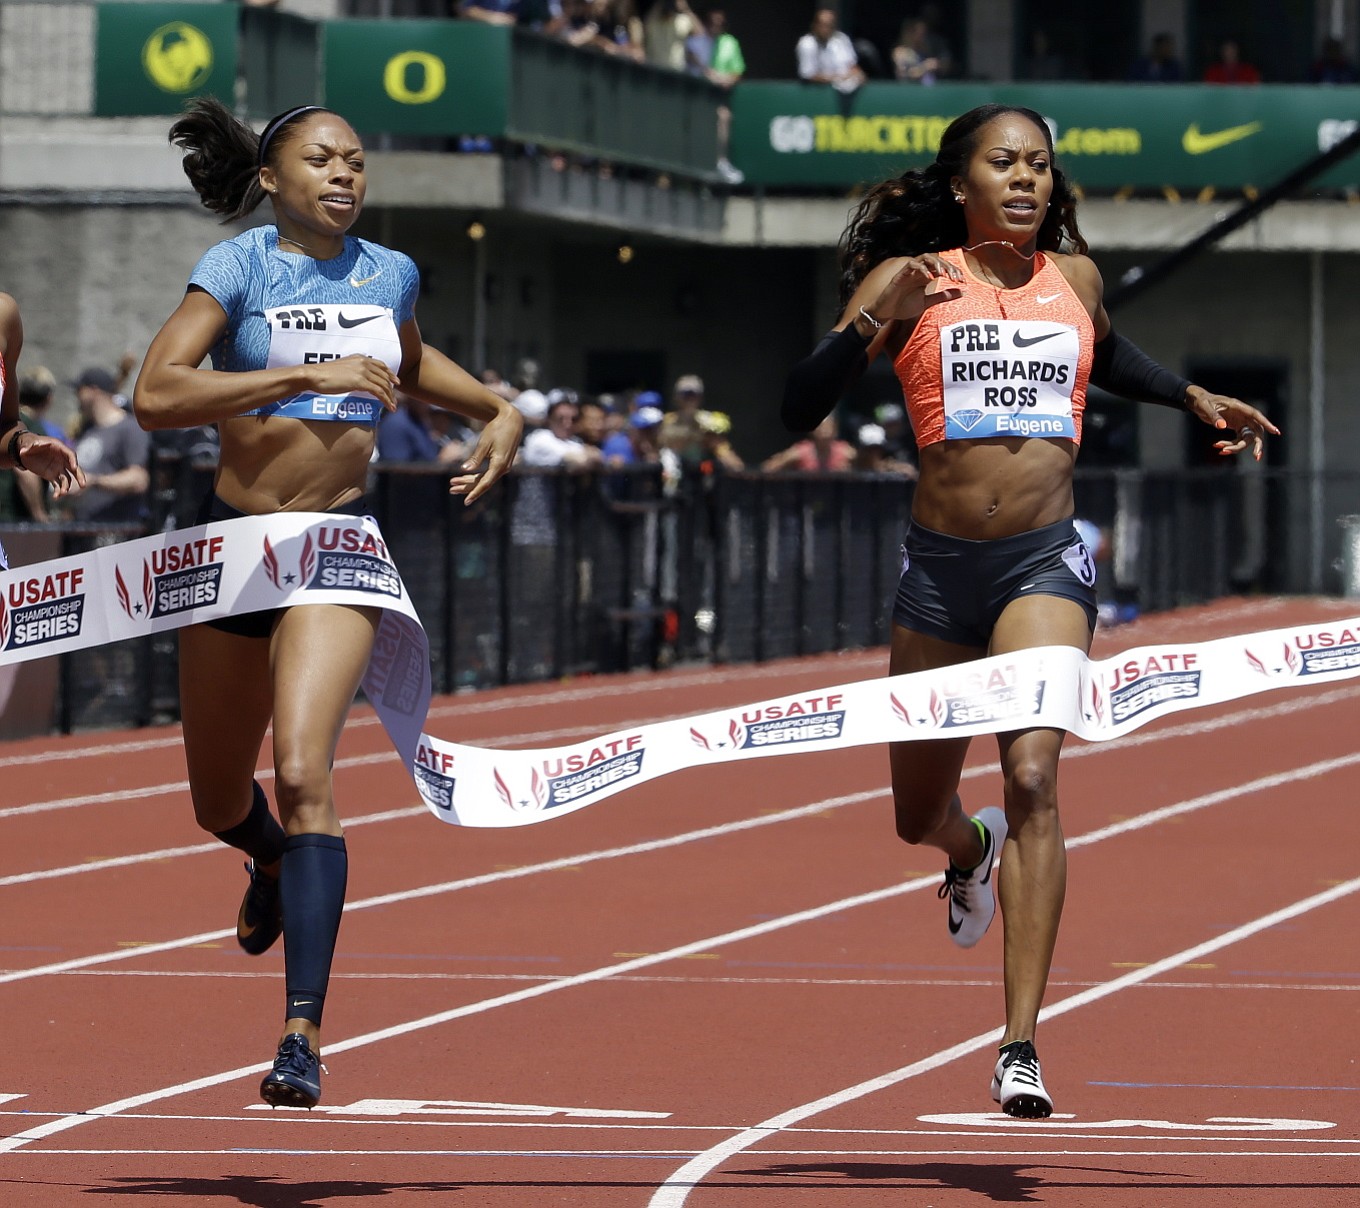 Allyson Felix, left, hits the tape ahead of Sanya Richards-Ross to win the 400-meter race during the Prefontaine Classic track and field meet in Eugene, Ore., Saturday, May 30, 2015.